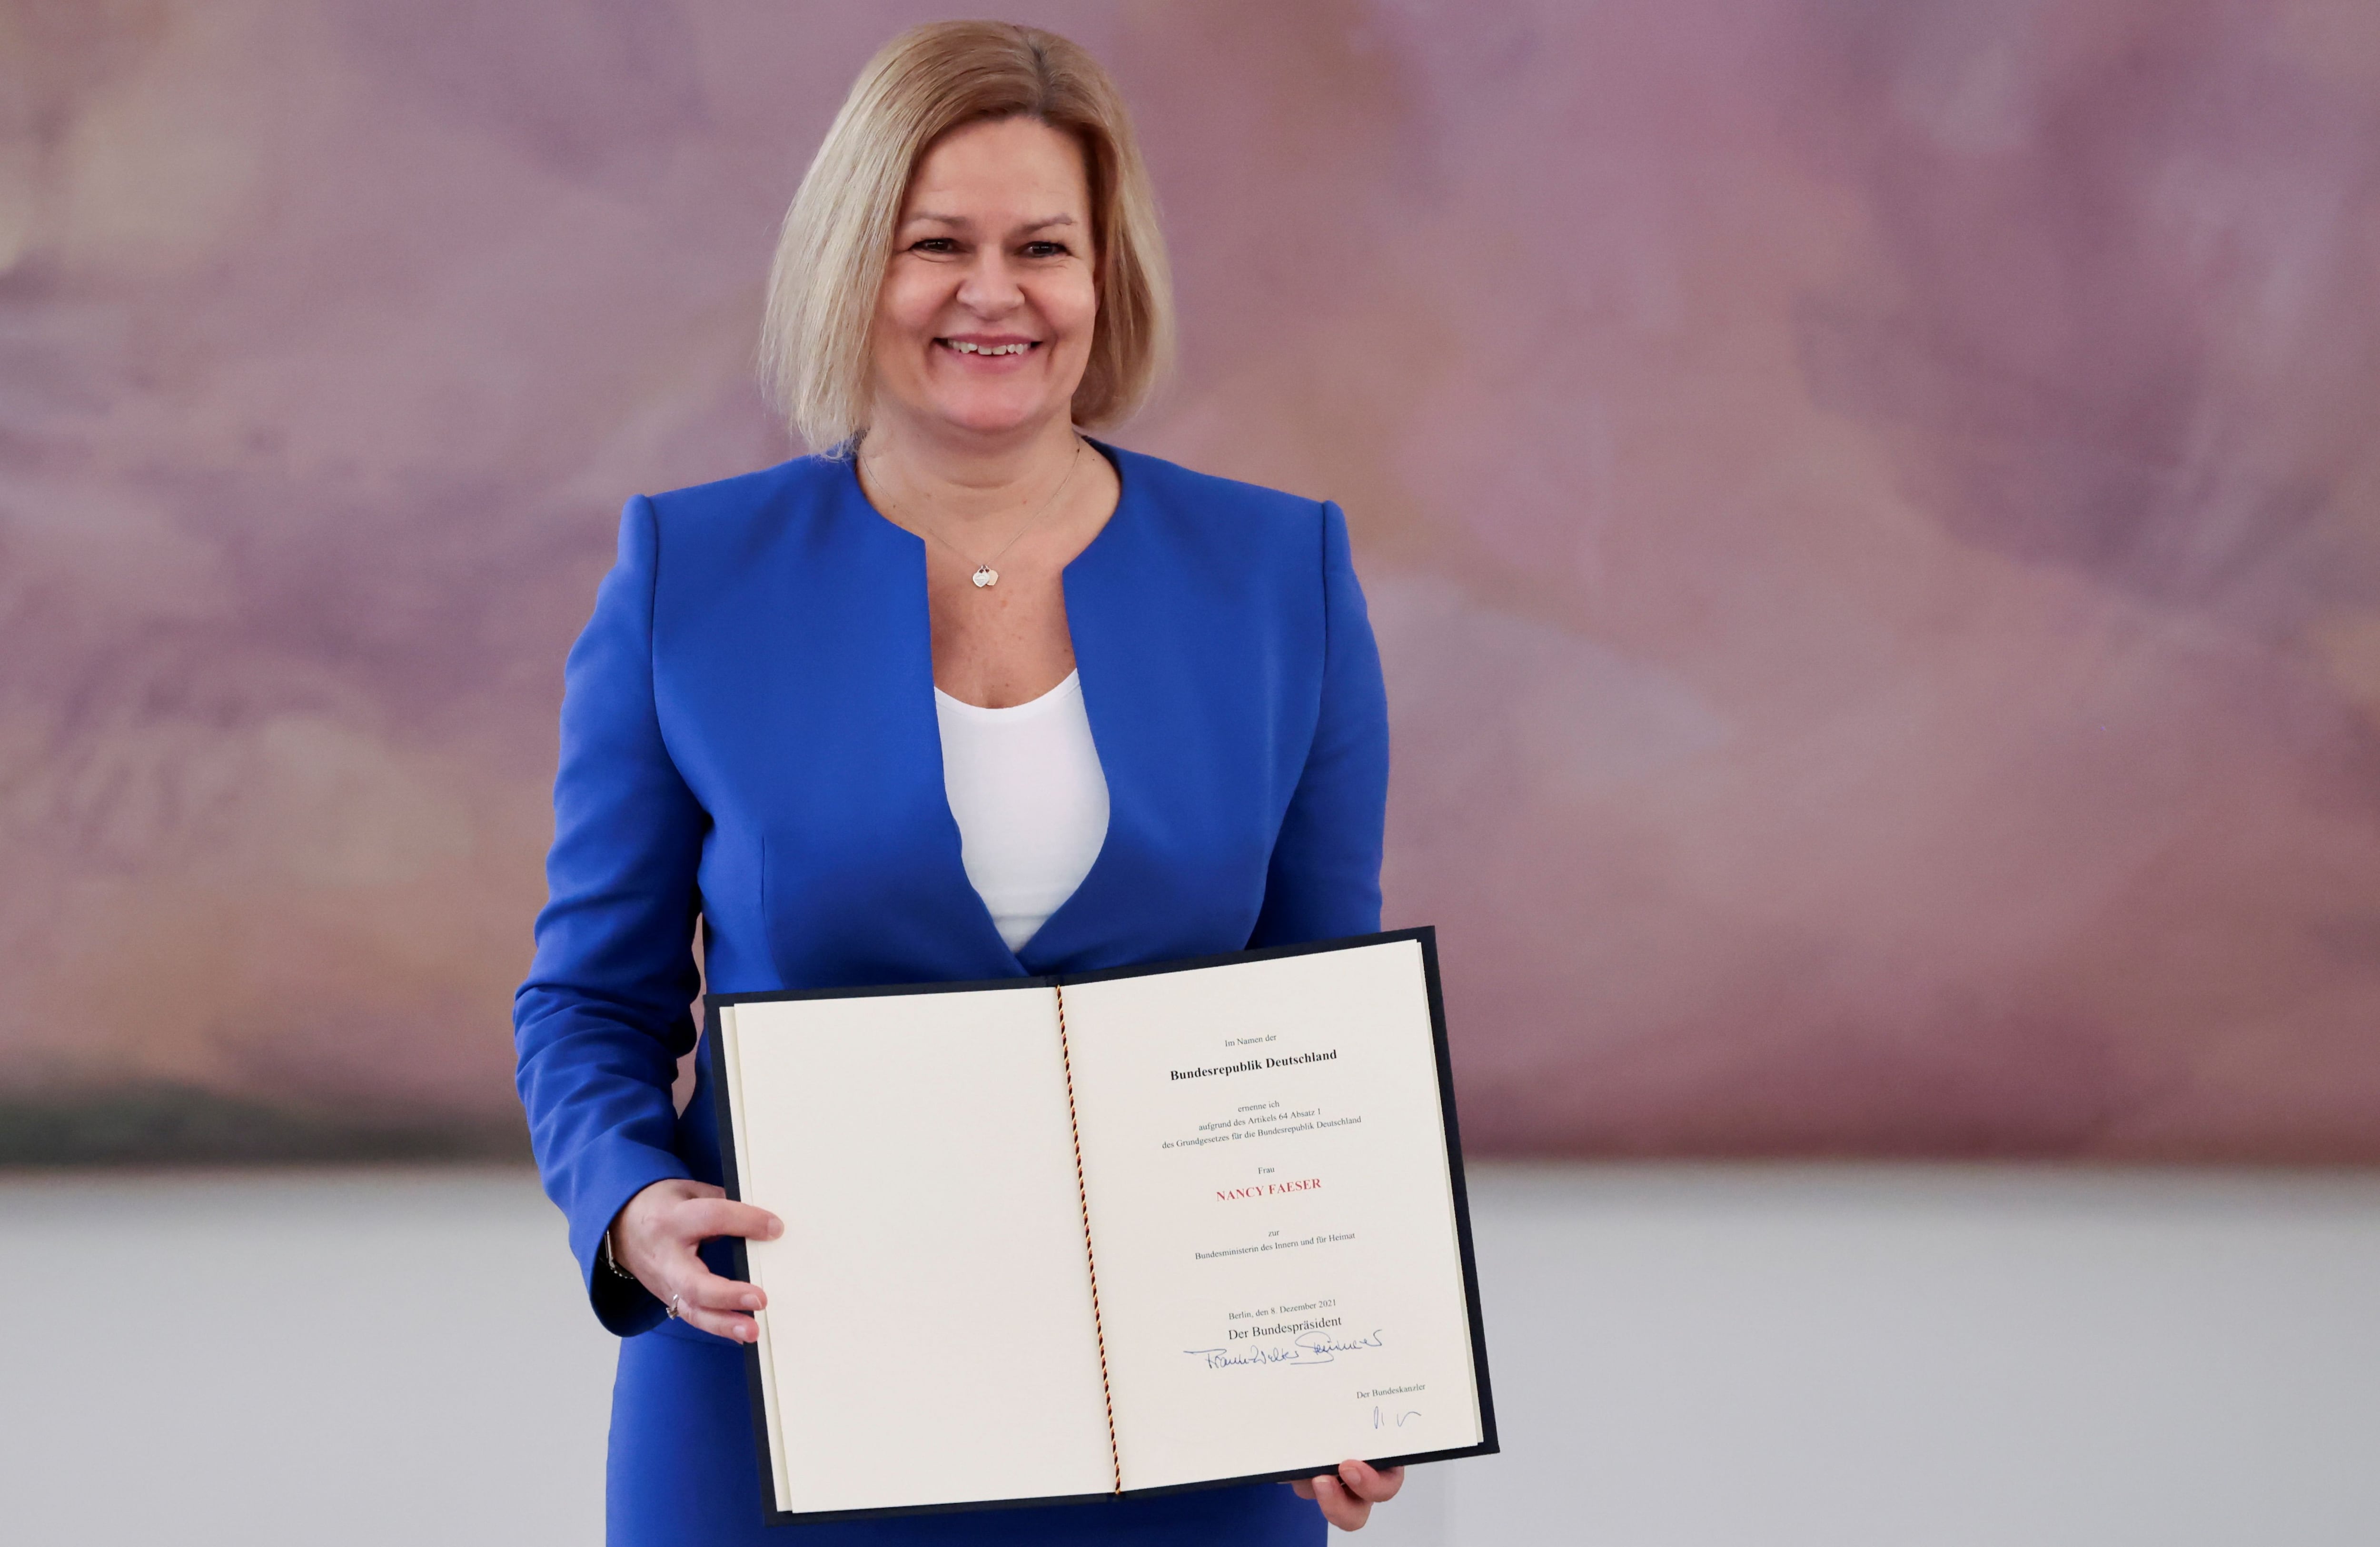 German Interior Minister Nancy Faeser poses after receiving her certificate of appointment from German President Frank-Walter Steinmeier during a ceremony at Bellevue Palace in Berlin, Germany, on December 8, 2021. REUTERS / Hannibal Hanschke